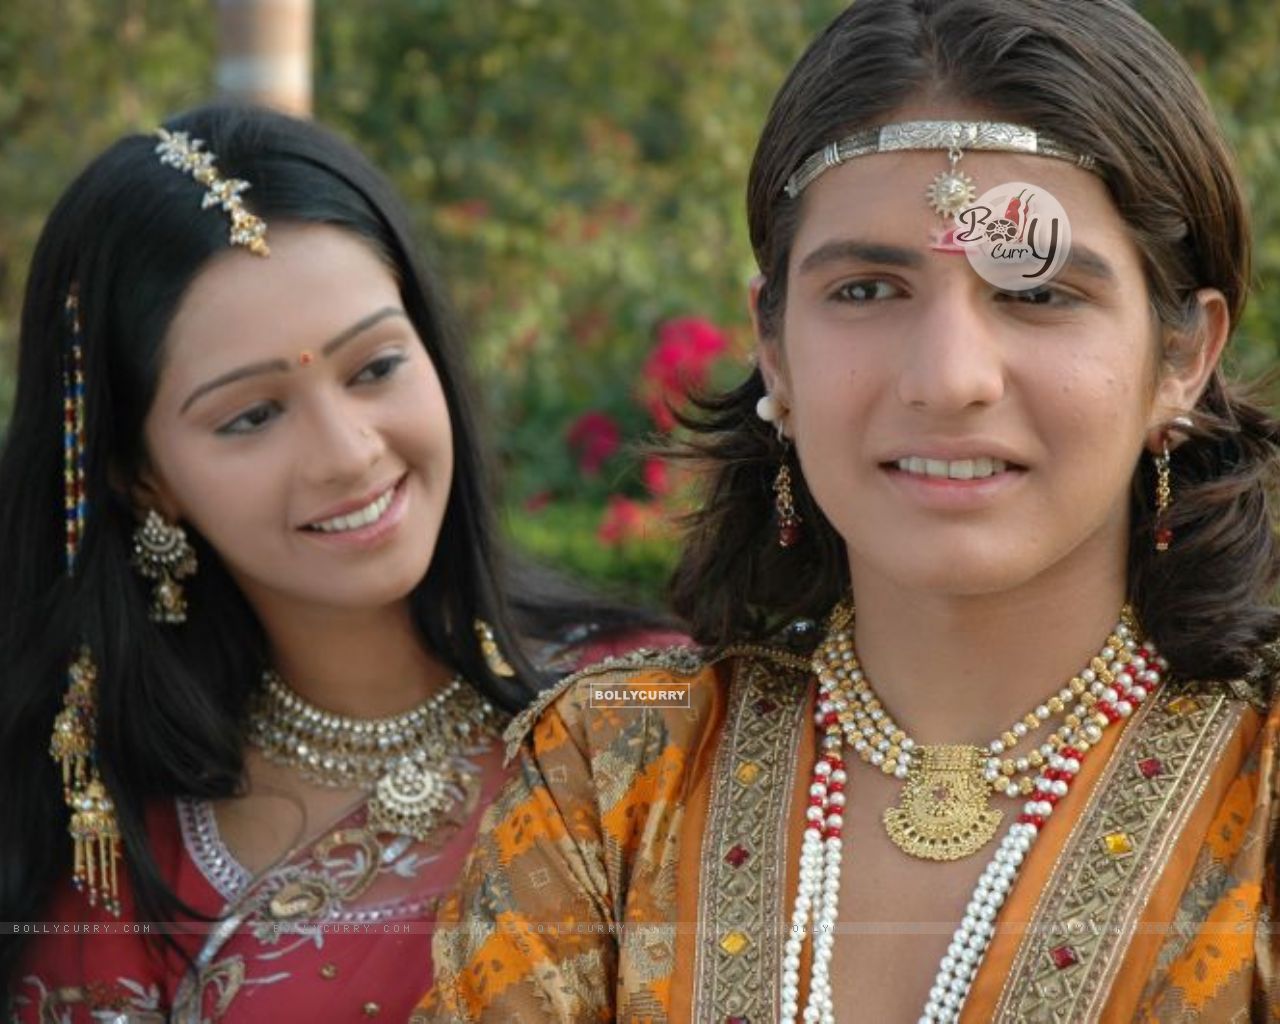 Prithviraj Chauhan Serial Wallpaper Download Rajat tokas is an indian television actor, and has mostly been part of historical dramas. prithviraj chauhan serial wallpaper download